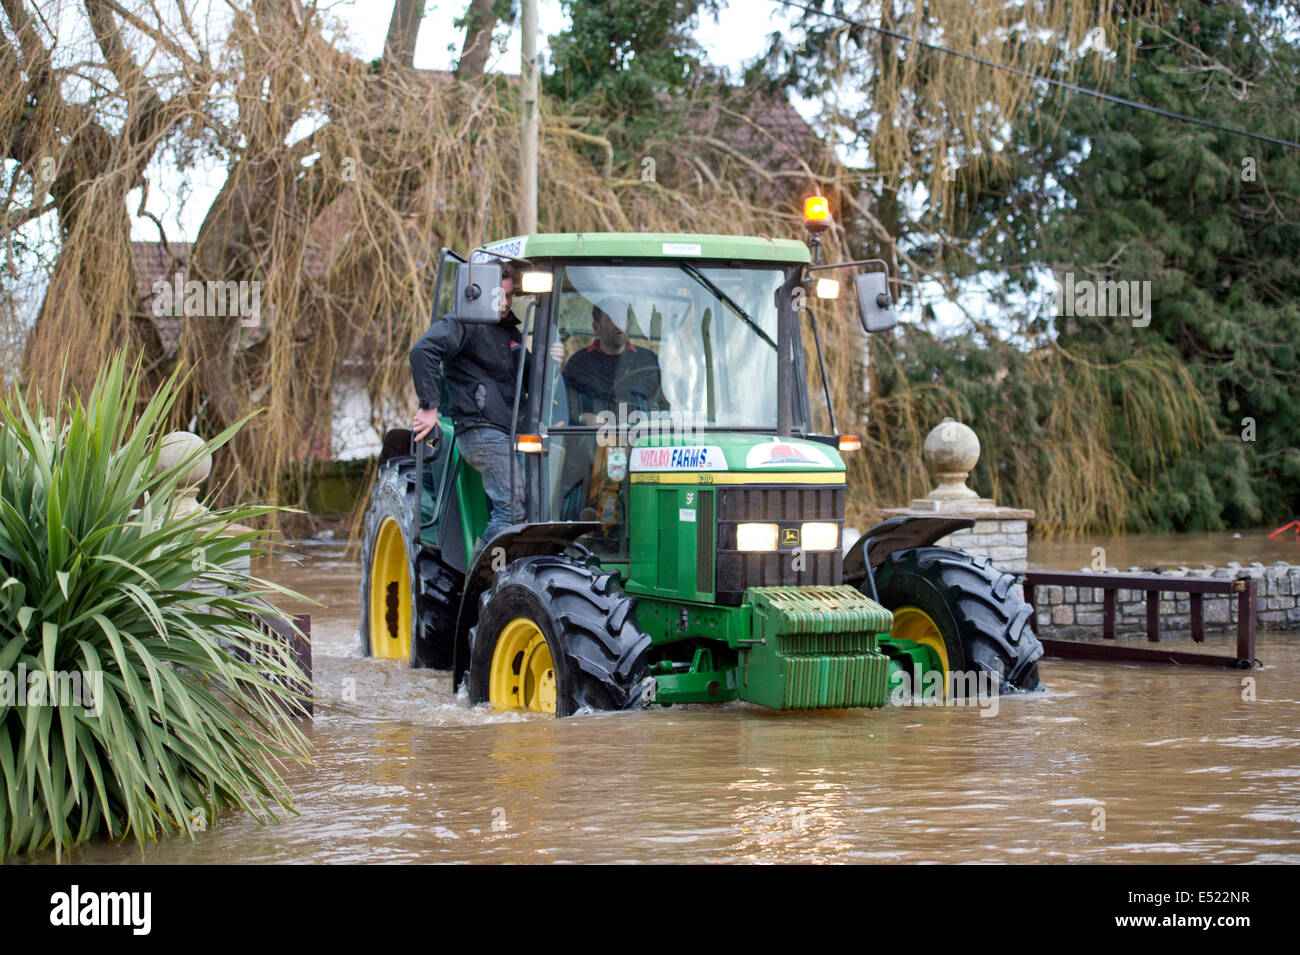 A tractor reaches a home swamped by floodwater in the village of Moorlands on the Somerset Levels UK Stock Photo